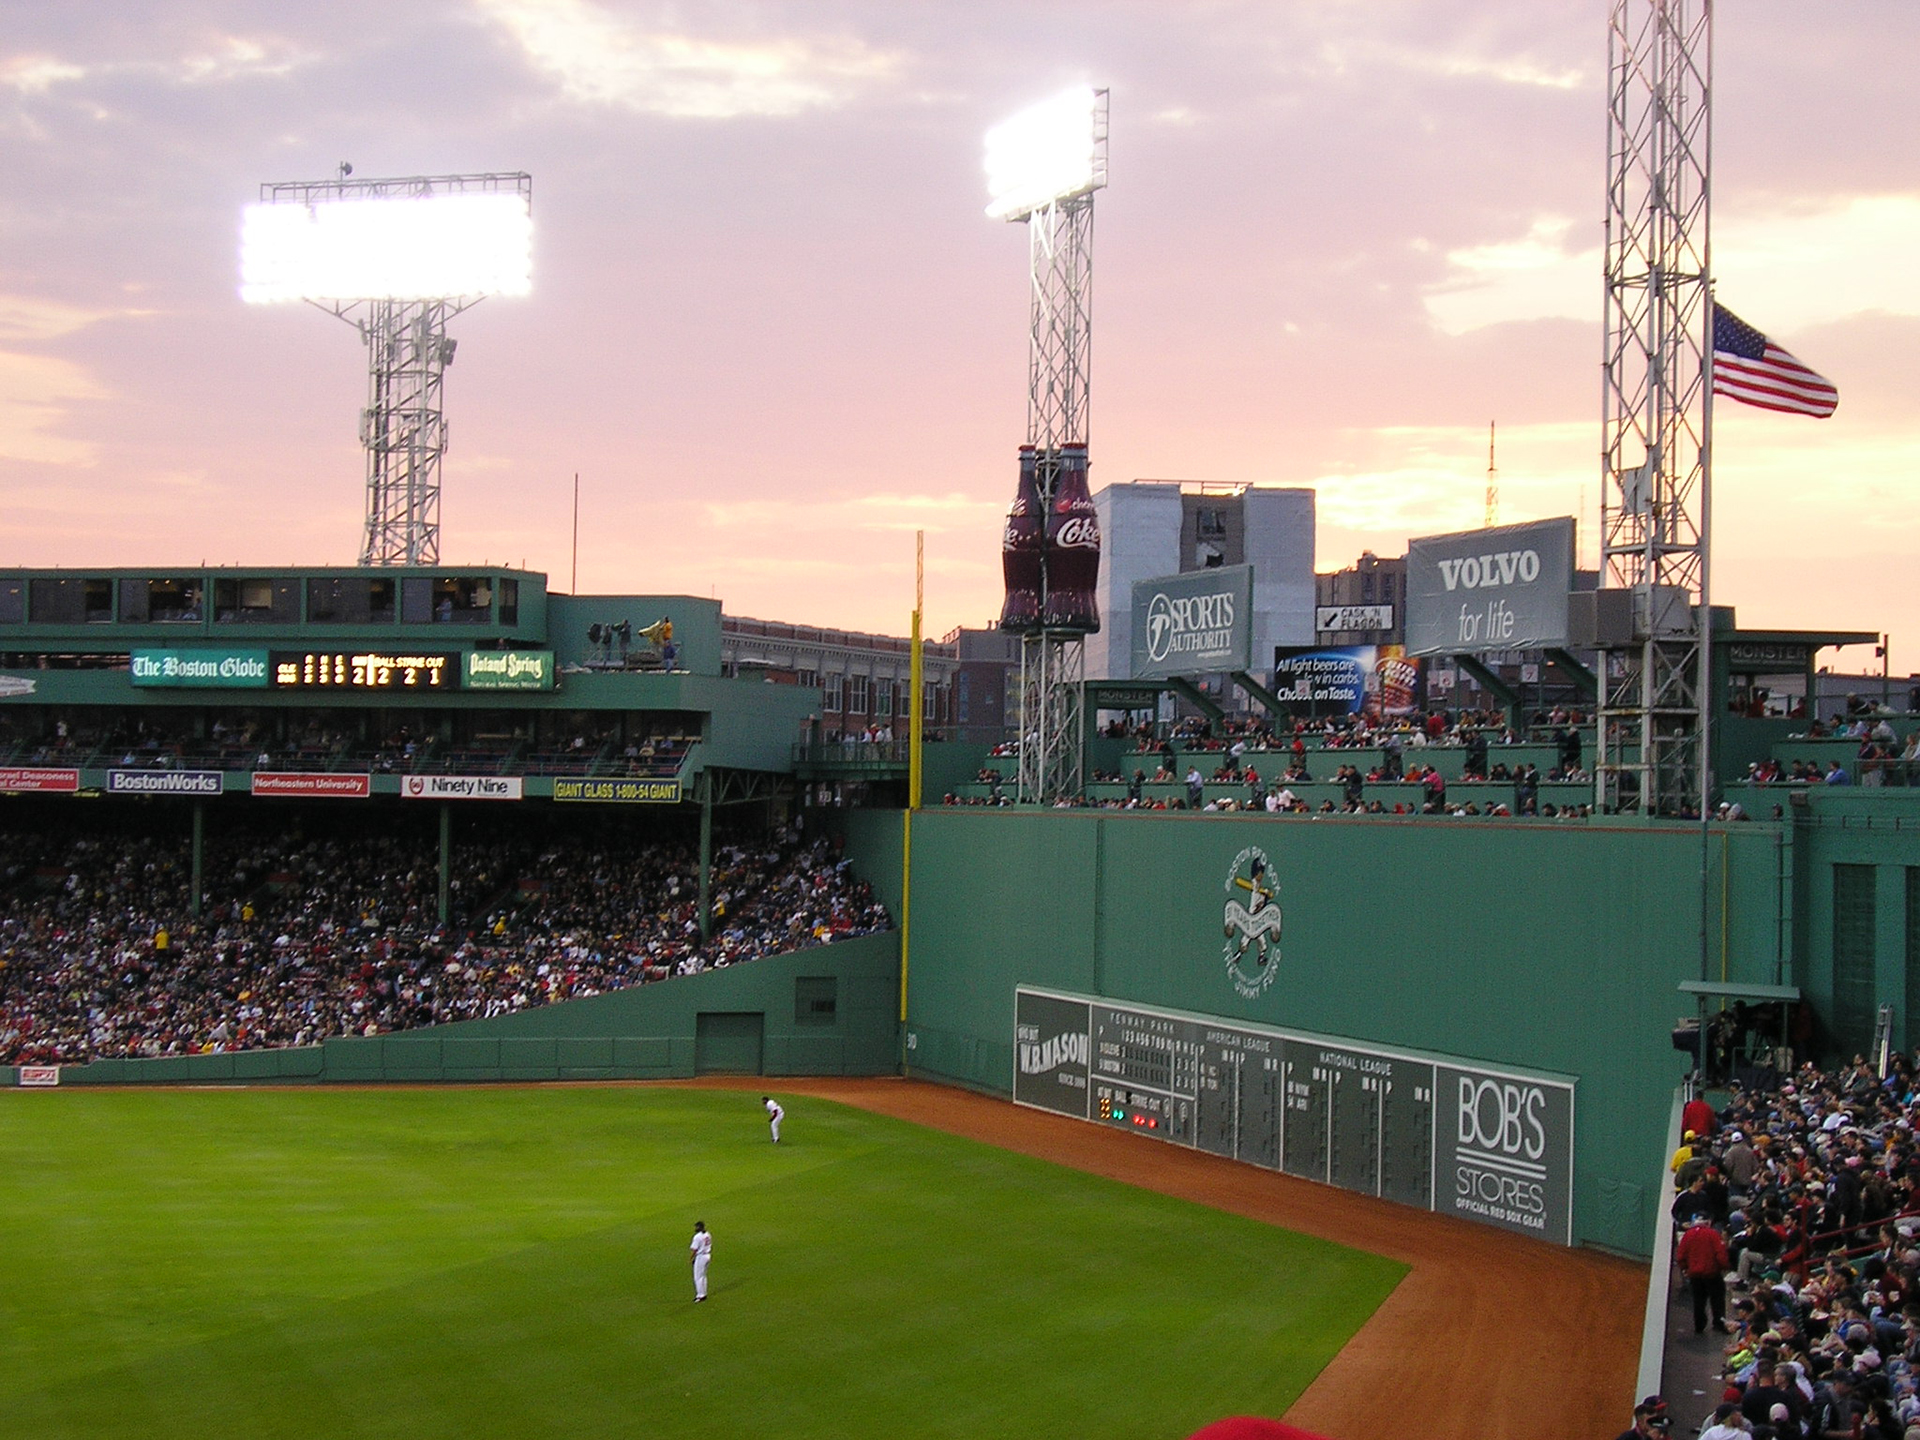 Developing: Red Sox To Add Seats in Front of Green Monster for